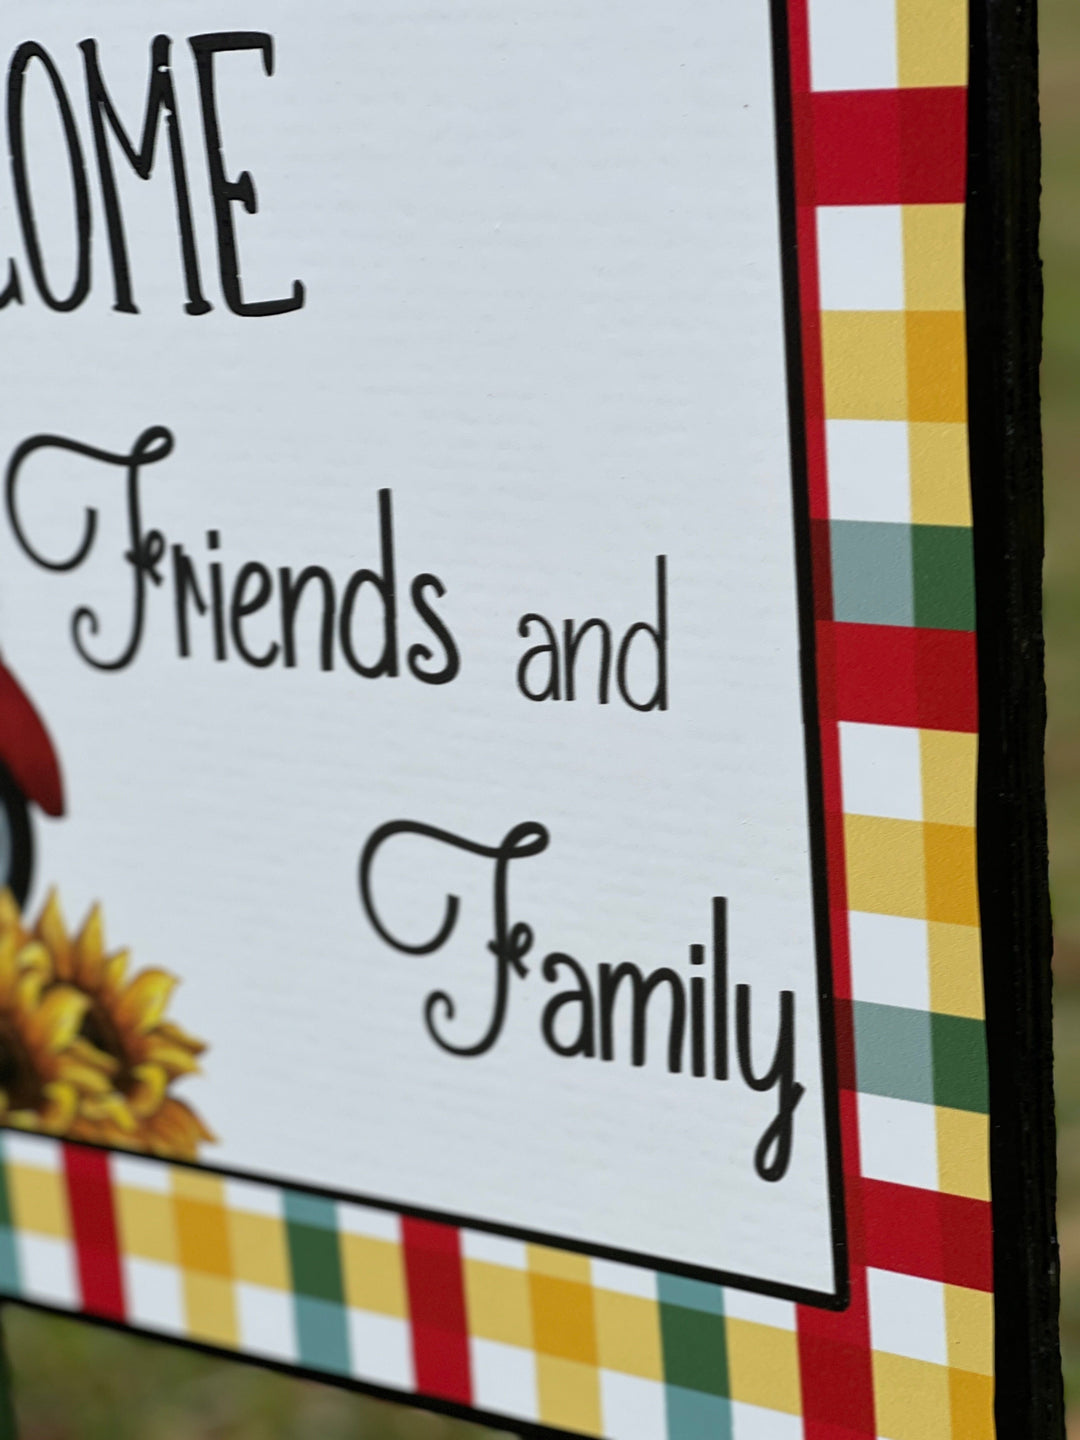 Welcome Yard Sign Decoration